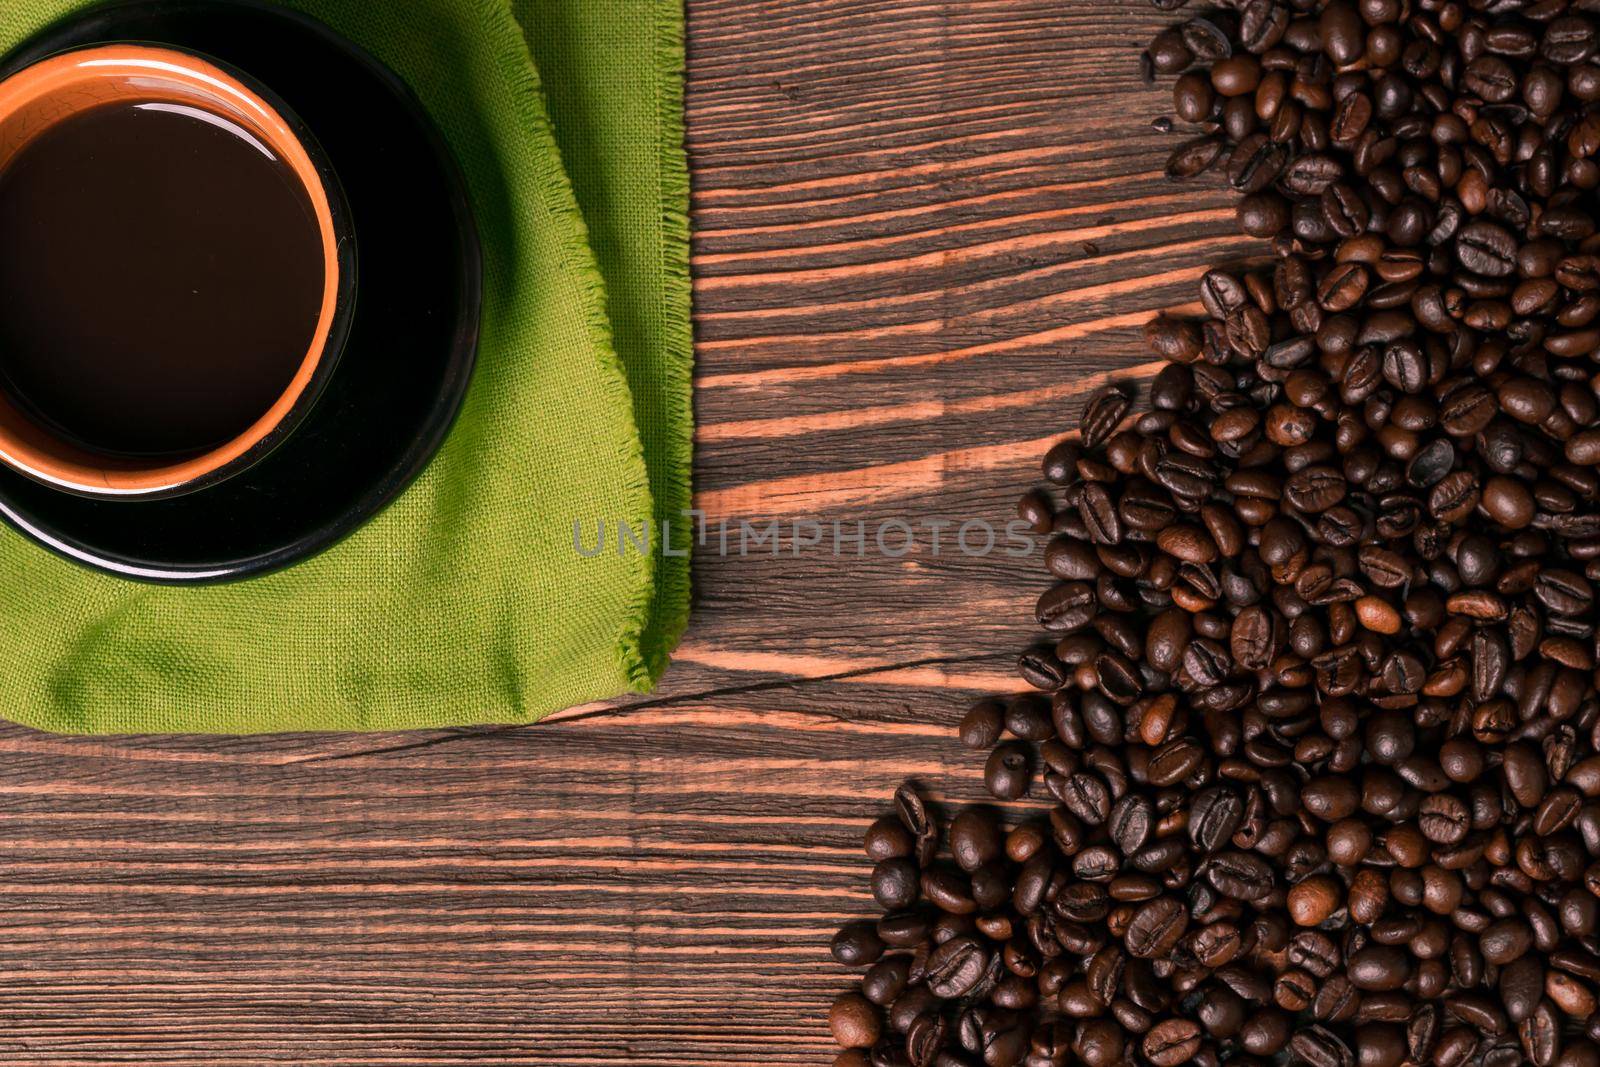 Coffee cup and coffee beans on wooden background. Top view. Still life. Copy space. Flat lay.